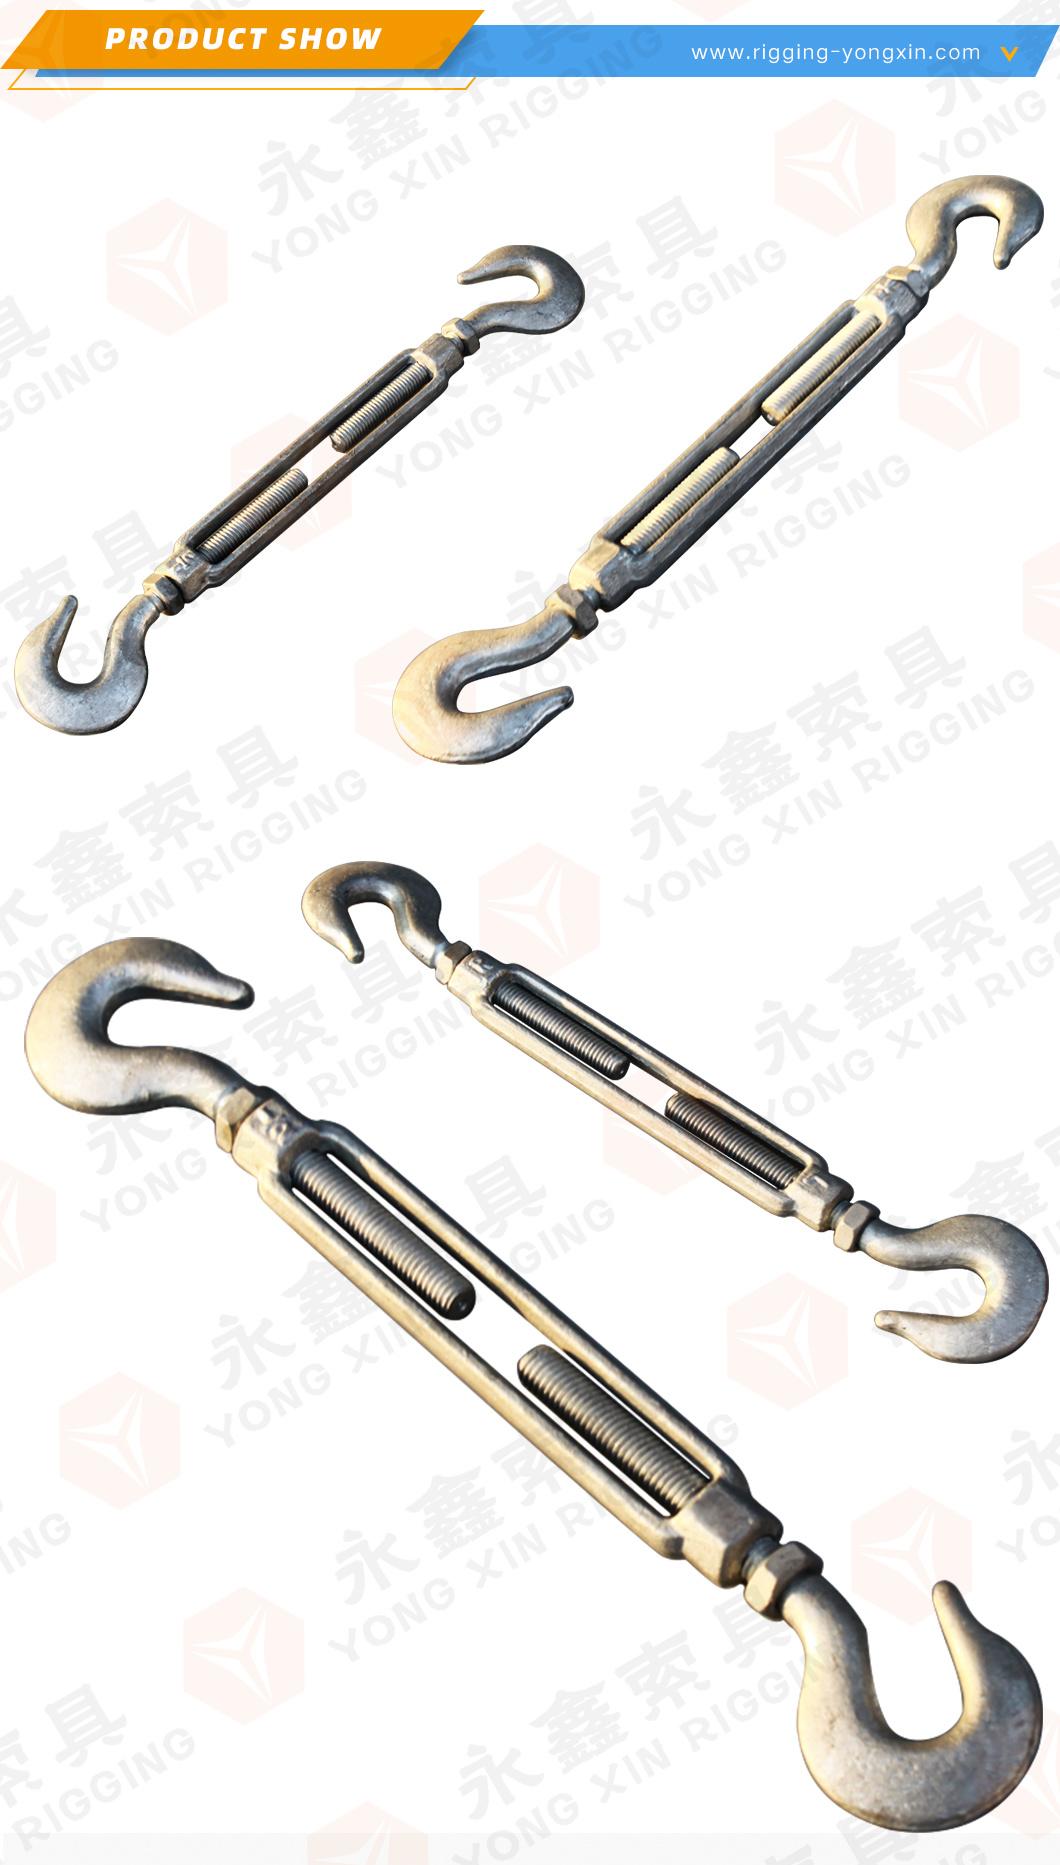 Stainless Steel Turnbuckle M6 M8